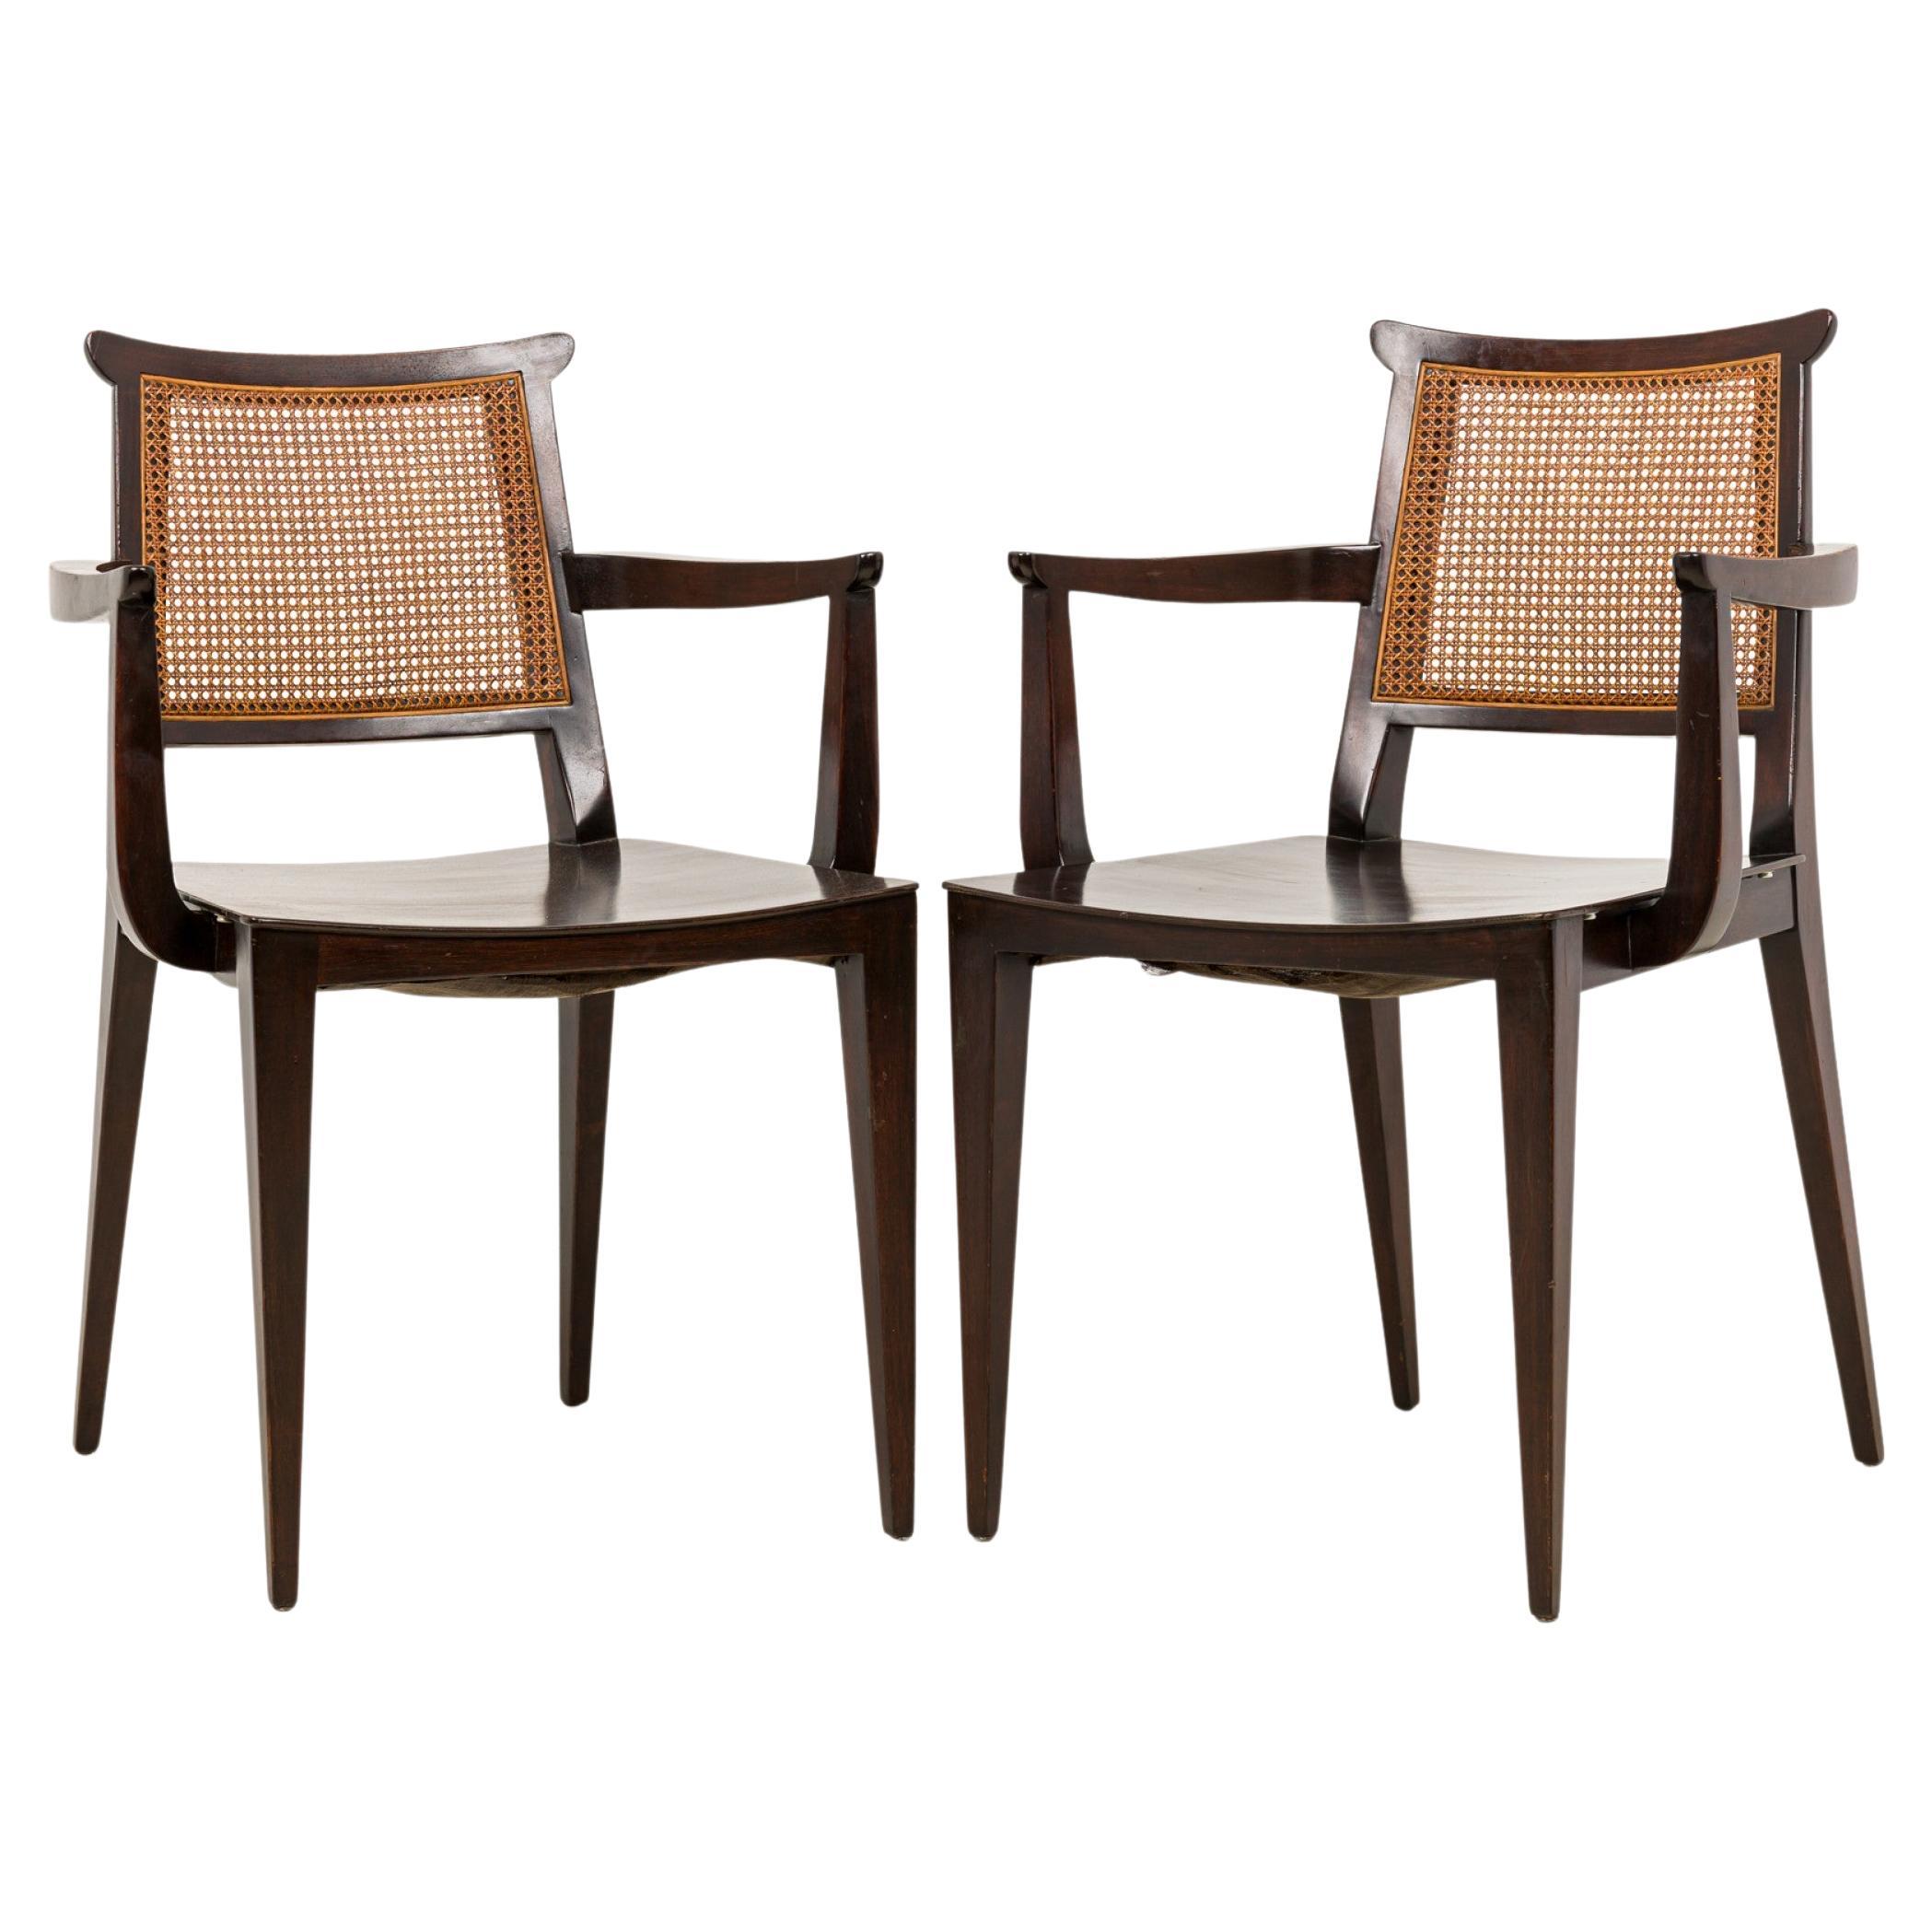 Set of 4 Edward Wormley for Dunbar Mid-Century Caned Back Wooden Dining Armchair For Sale